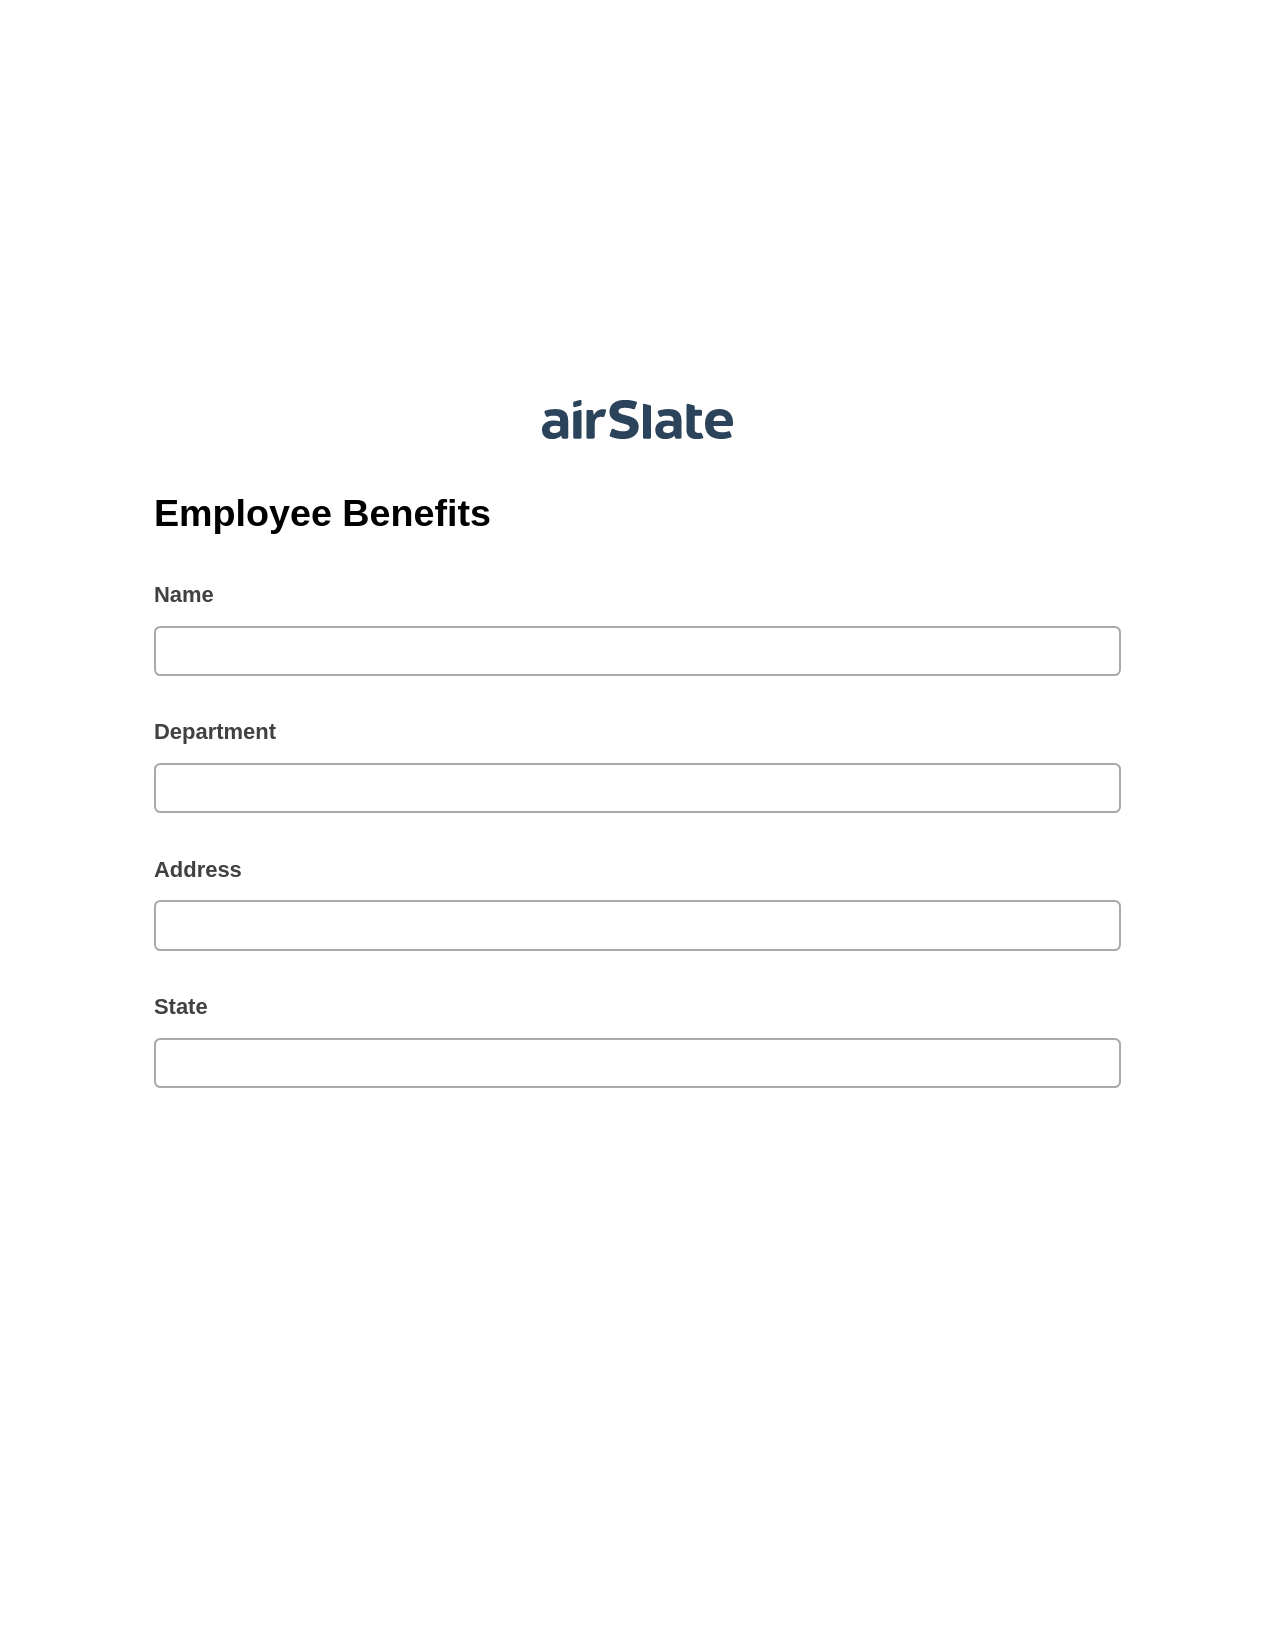 Employee Benefits Pre-fill from Excel Spreadsheet Bot, Update Salesforce Record Bot, Export to Formstack Documents Bot